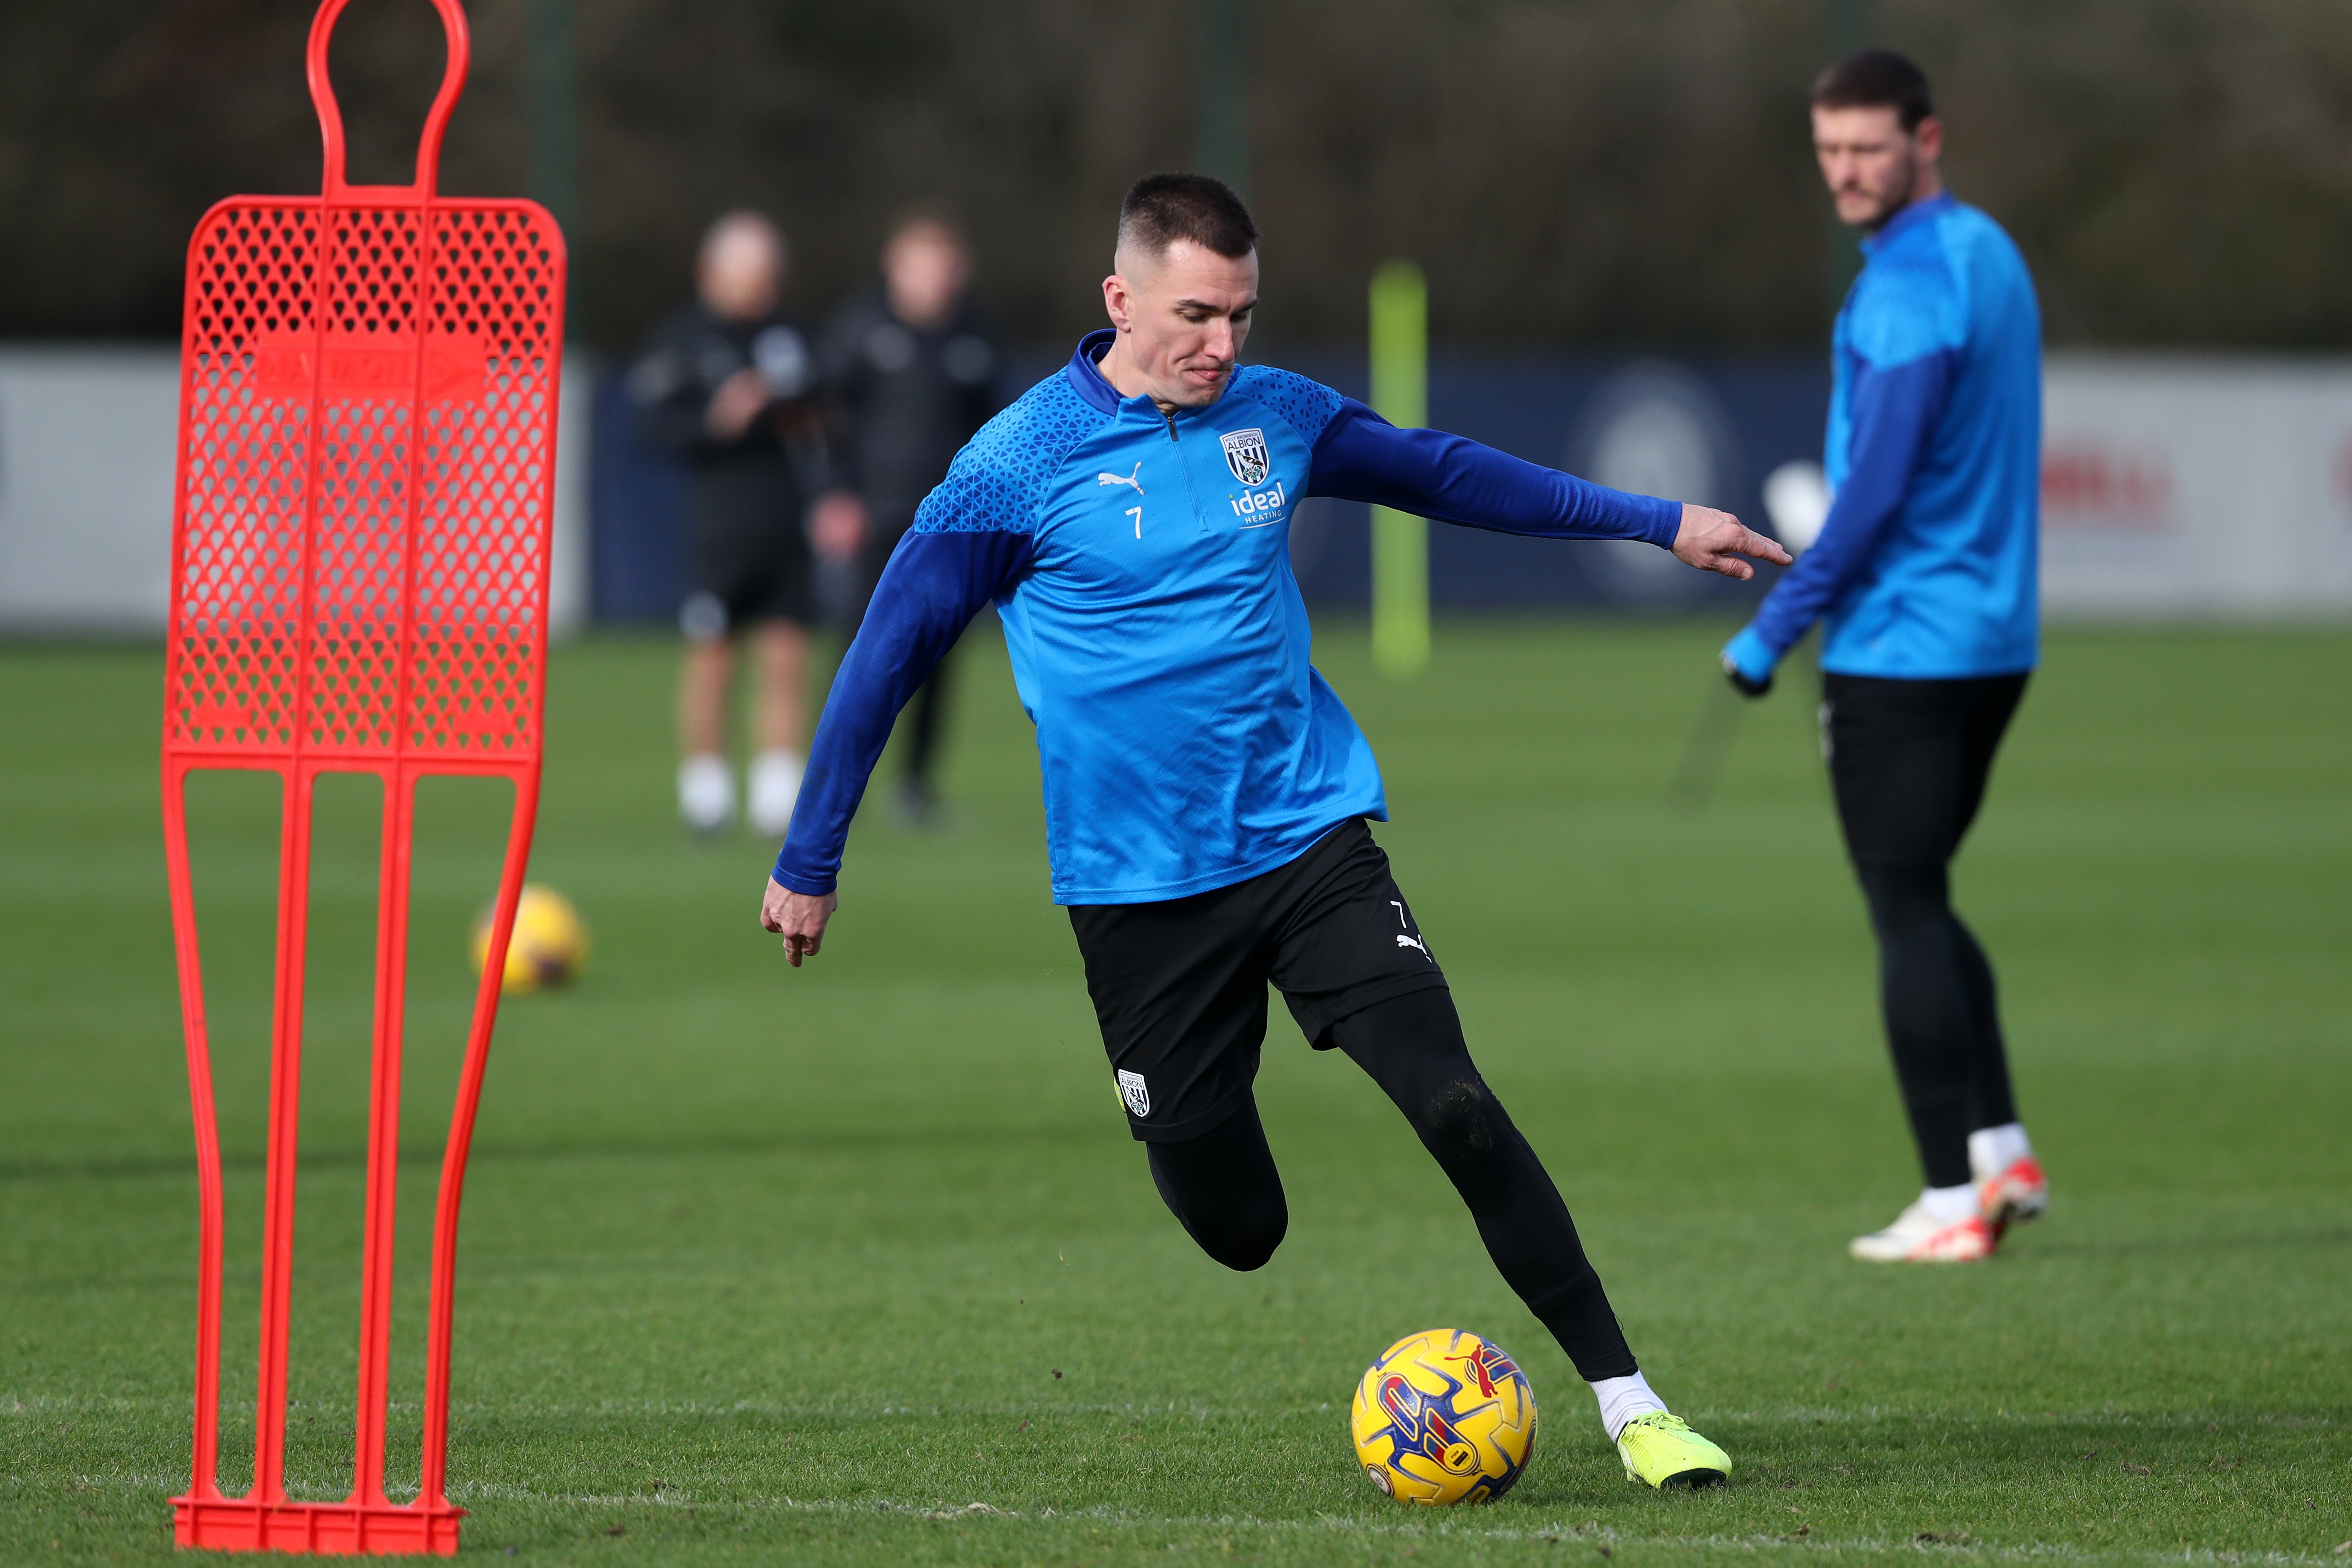 Jed Wallace shoots at goal during training